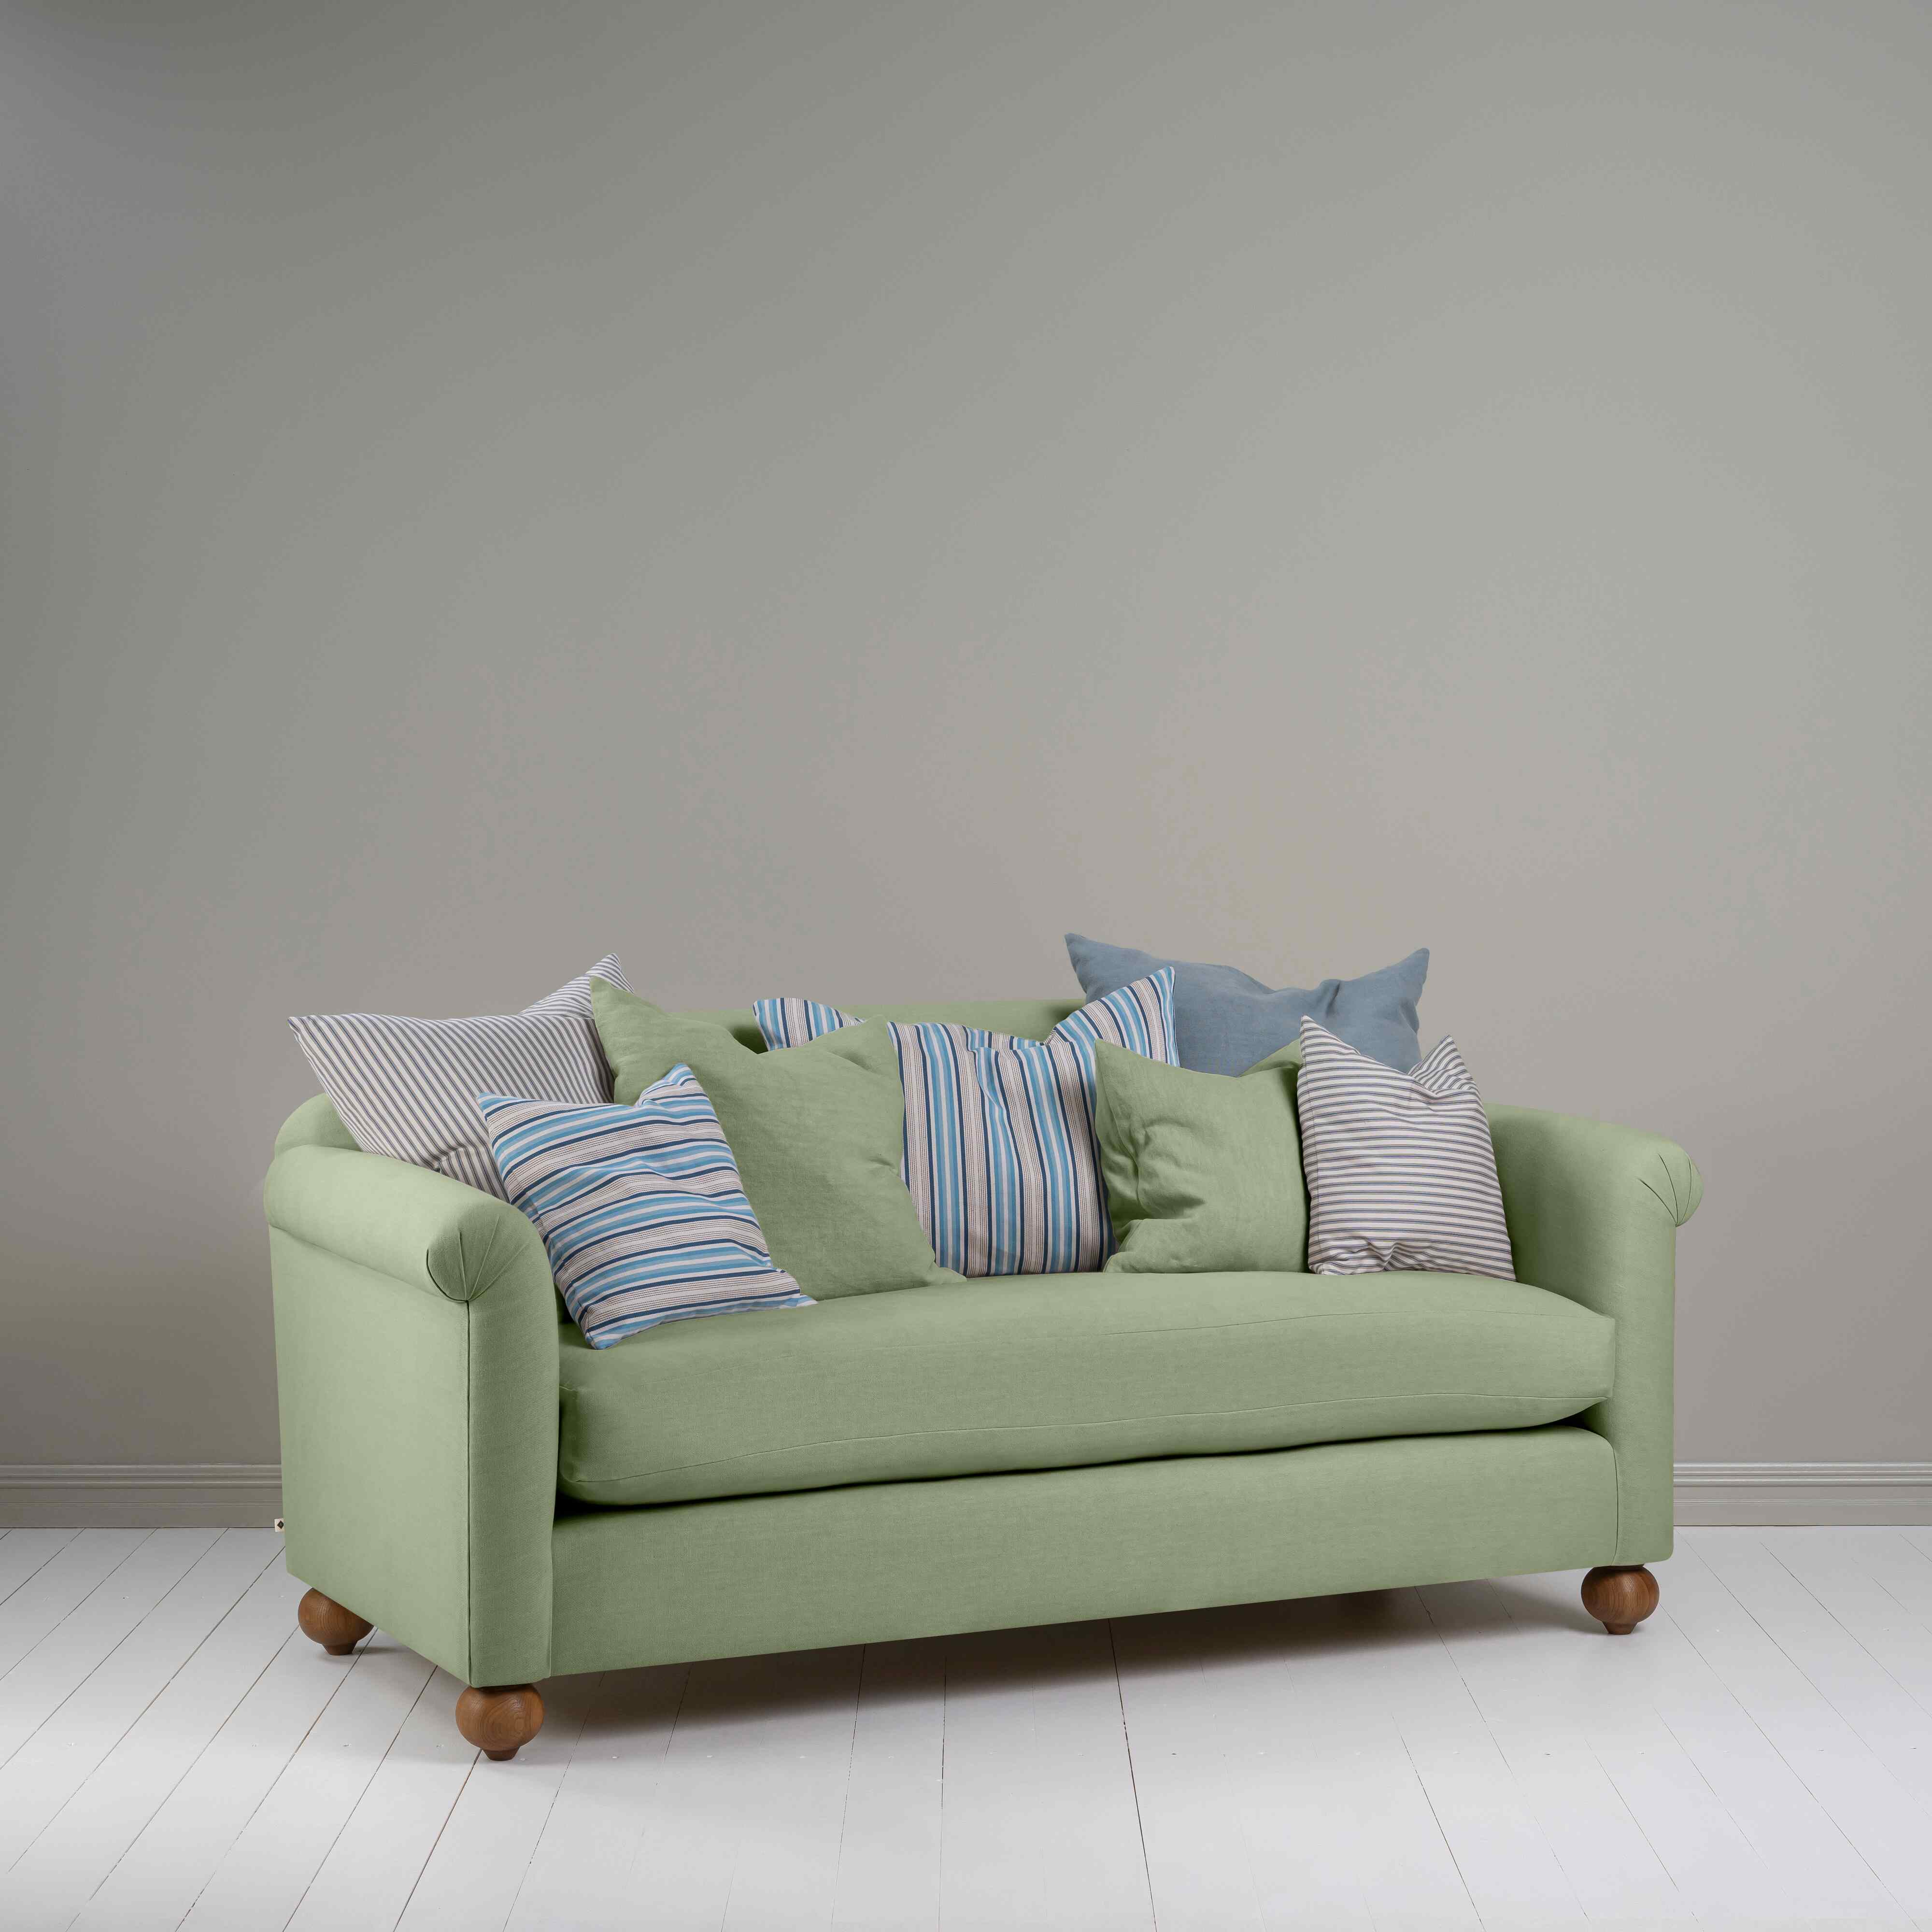  Dolittle 3 Seater Sofa in Laidback Linen Moss 